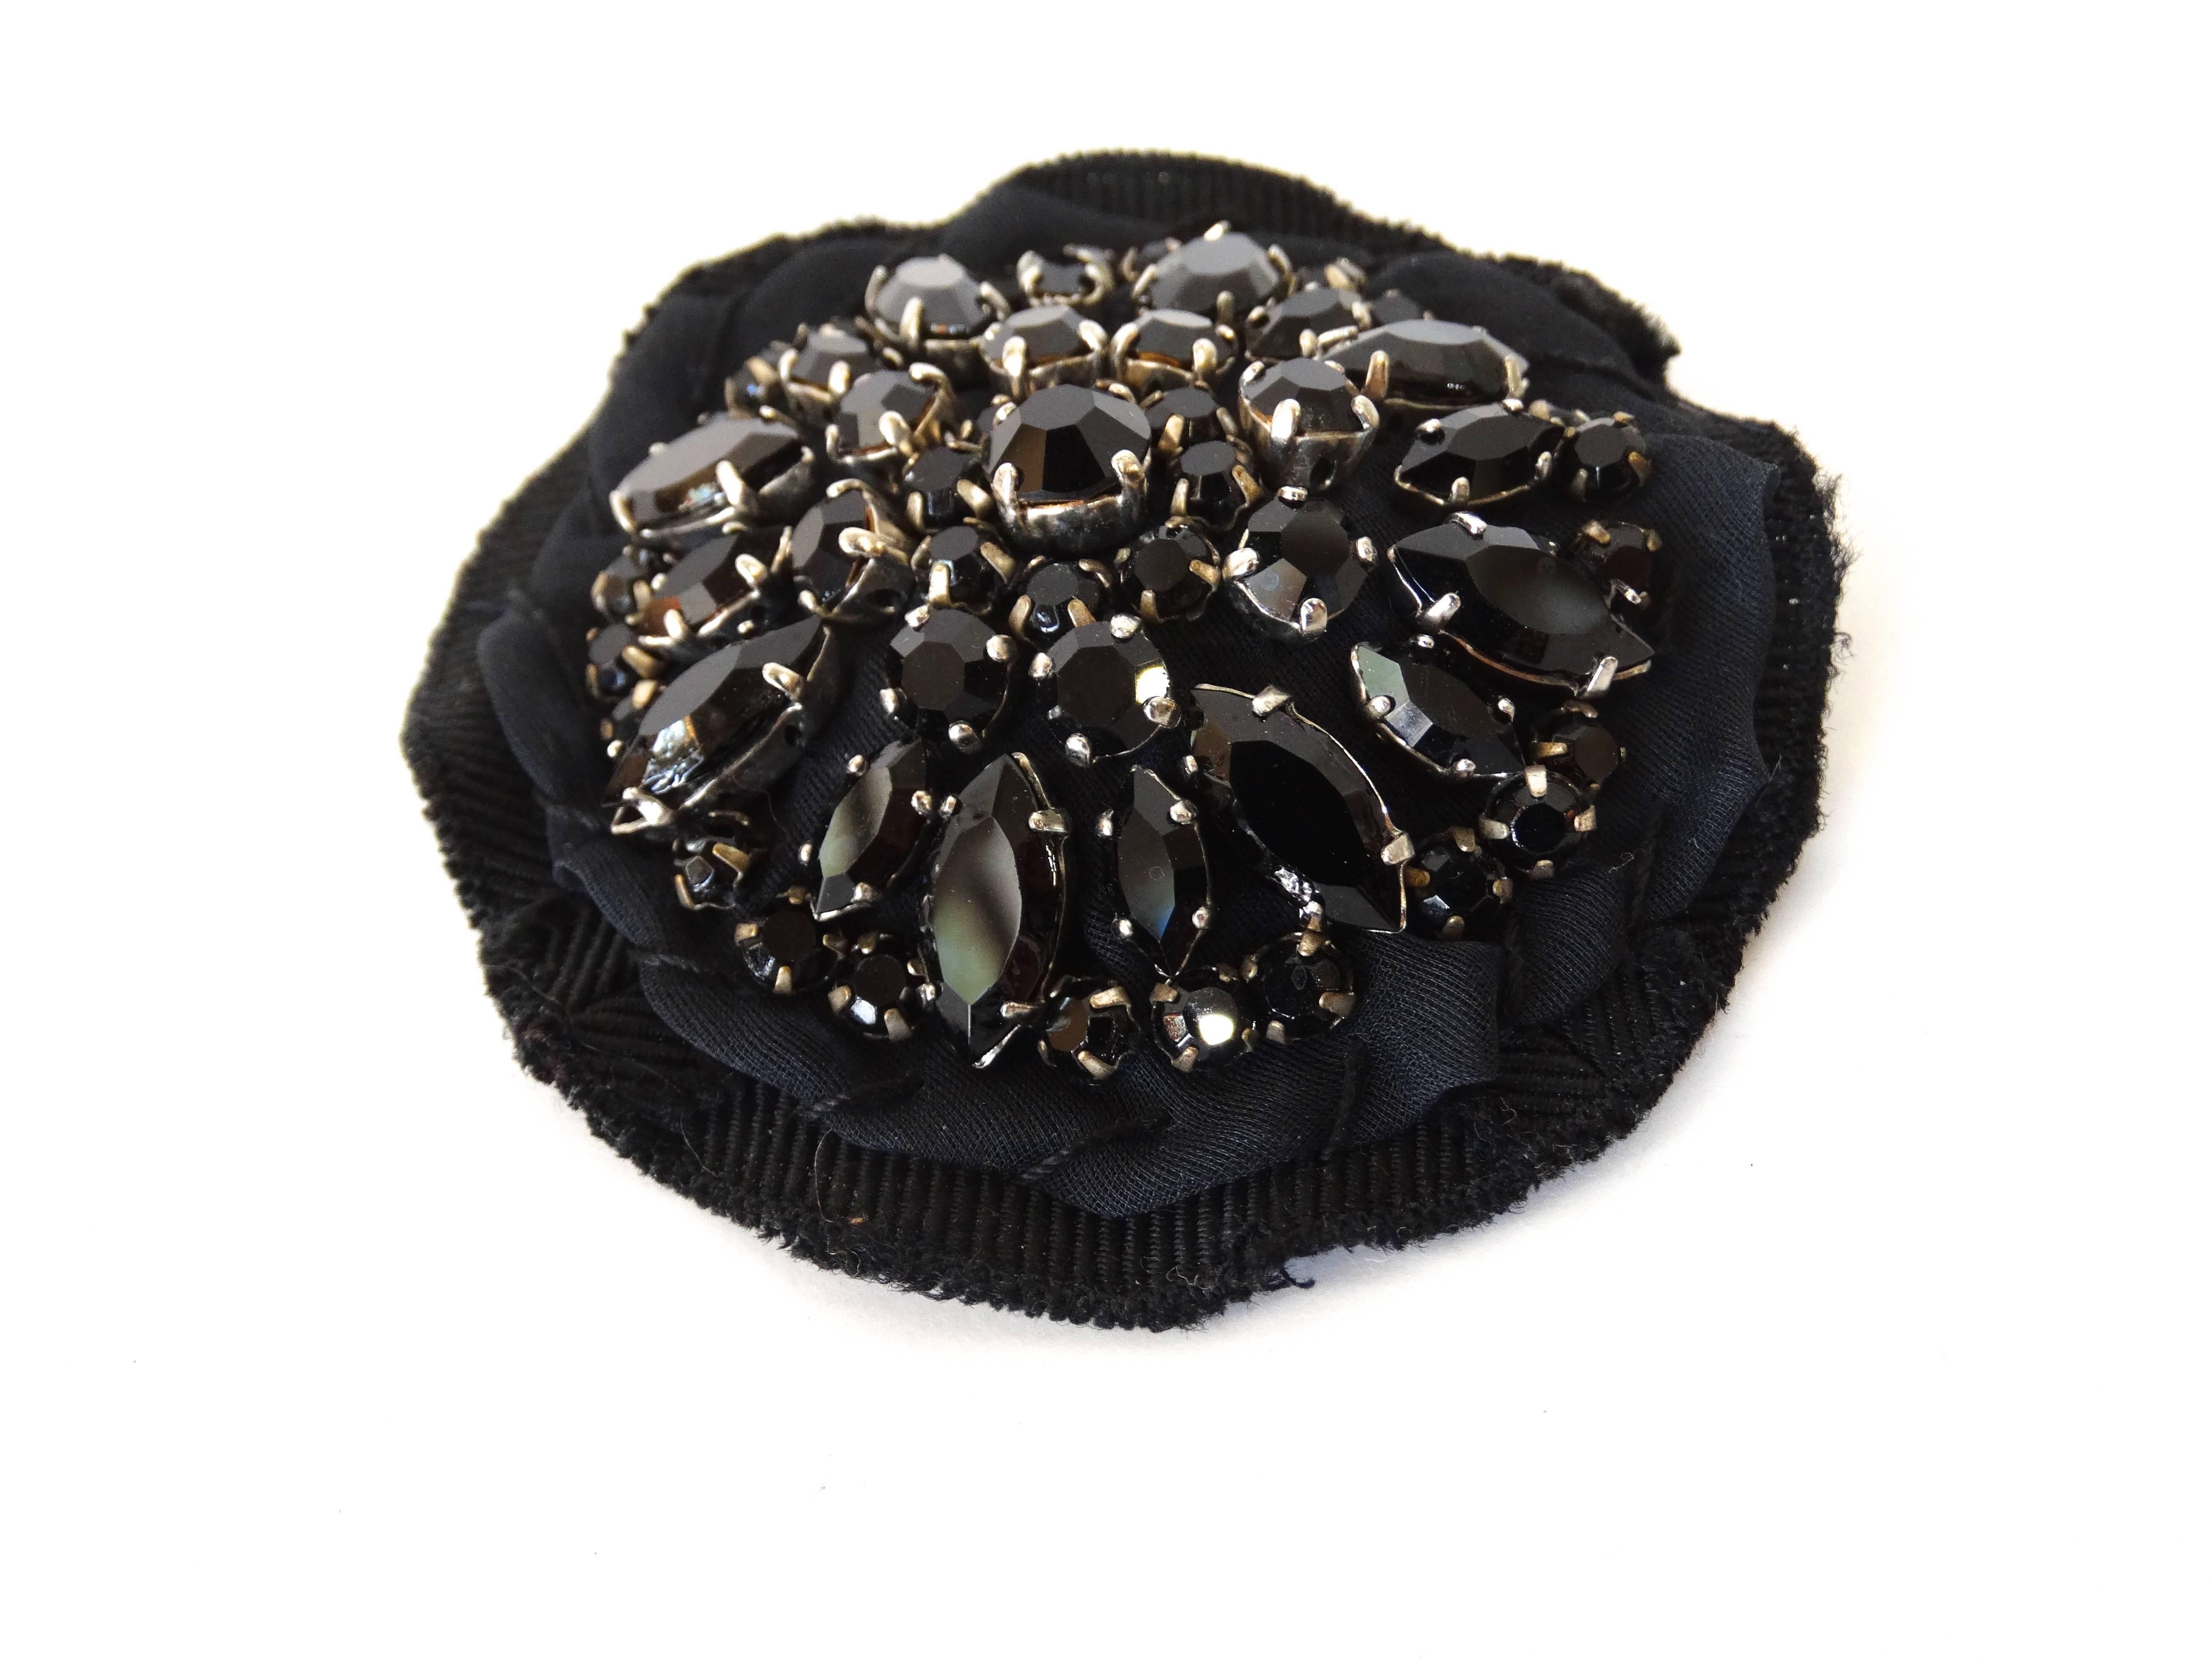 Incredible Prada Jewel Brooch! Black rhinestones arranged in a floral medallion on layers of woven black cotton. Measures 3& quot; across. Prada label atttached. 